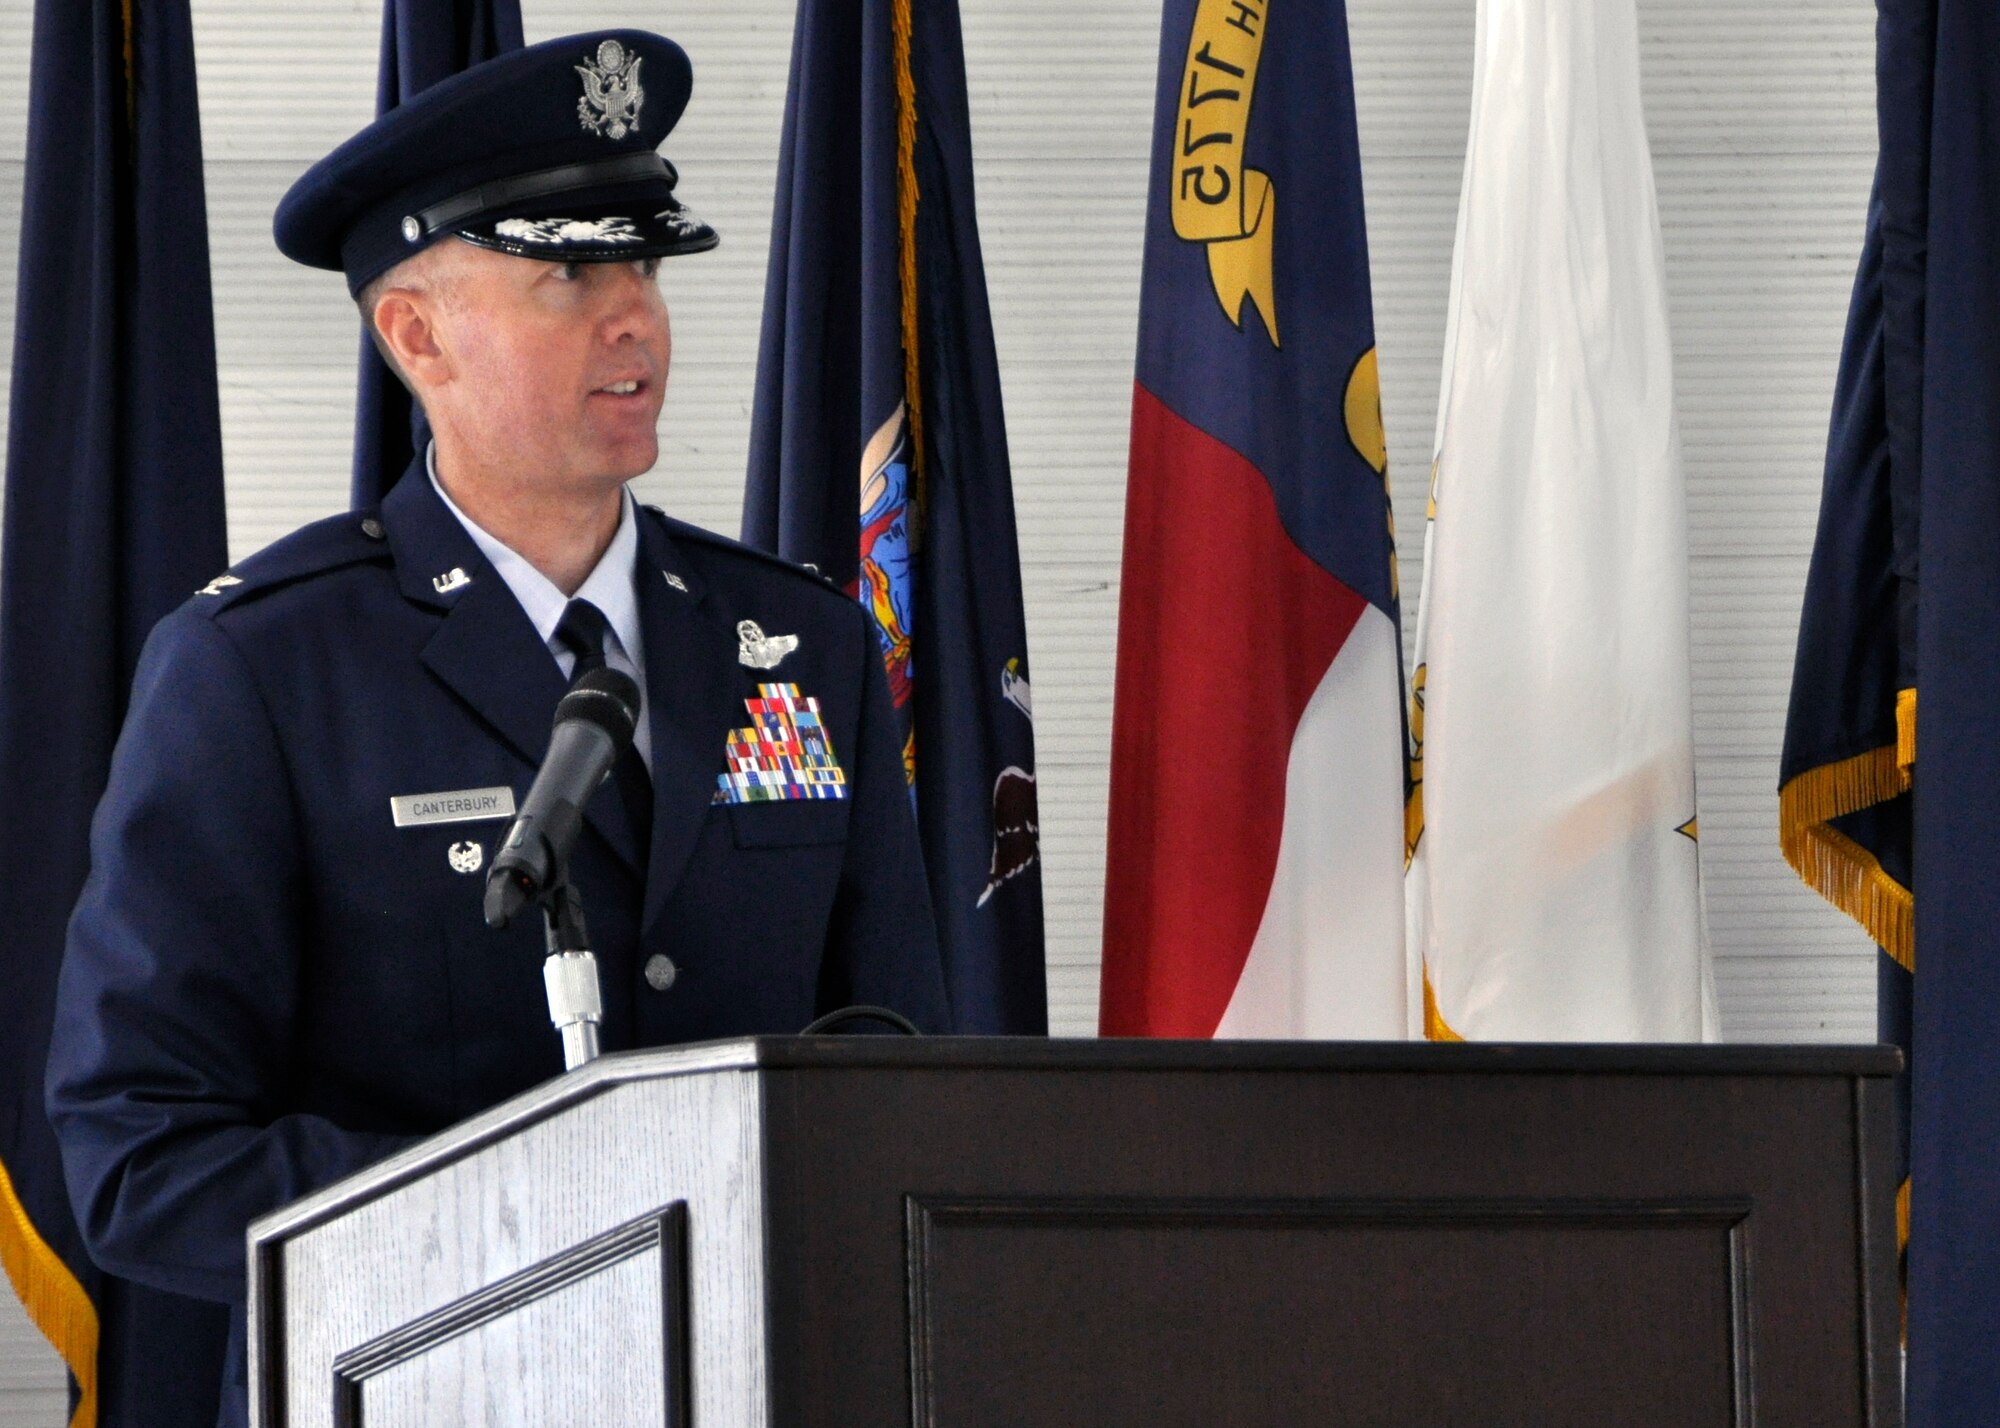 Col. Todd Canterbury speaks to the 33rd Fighter Wing for the first time as its commander during the wing's change of command ceremony June 14 at Eglin Air Force Base, Fla. Canterbury took command of the wing from Col. Andrew Toth, who leaves to become director of assignments at Joint Base San Antonio-Randolph, Texas. (U.S. Air Force Photo/Sara Vidoni)